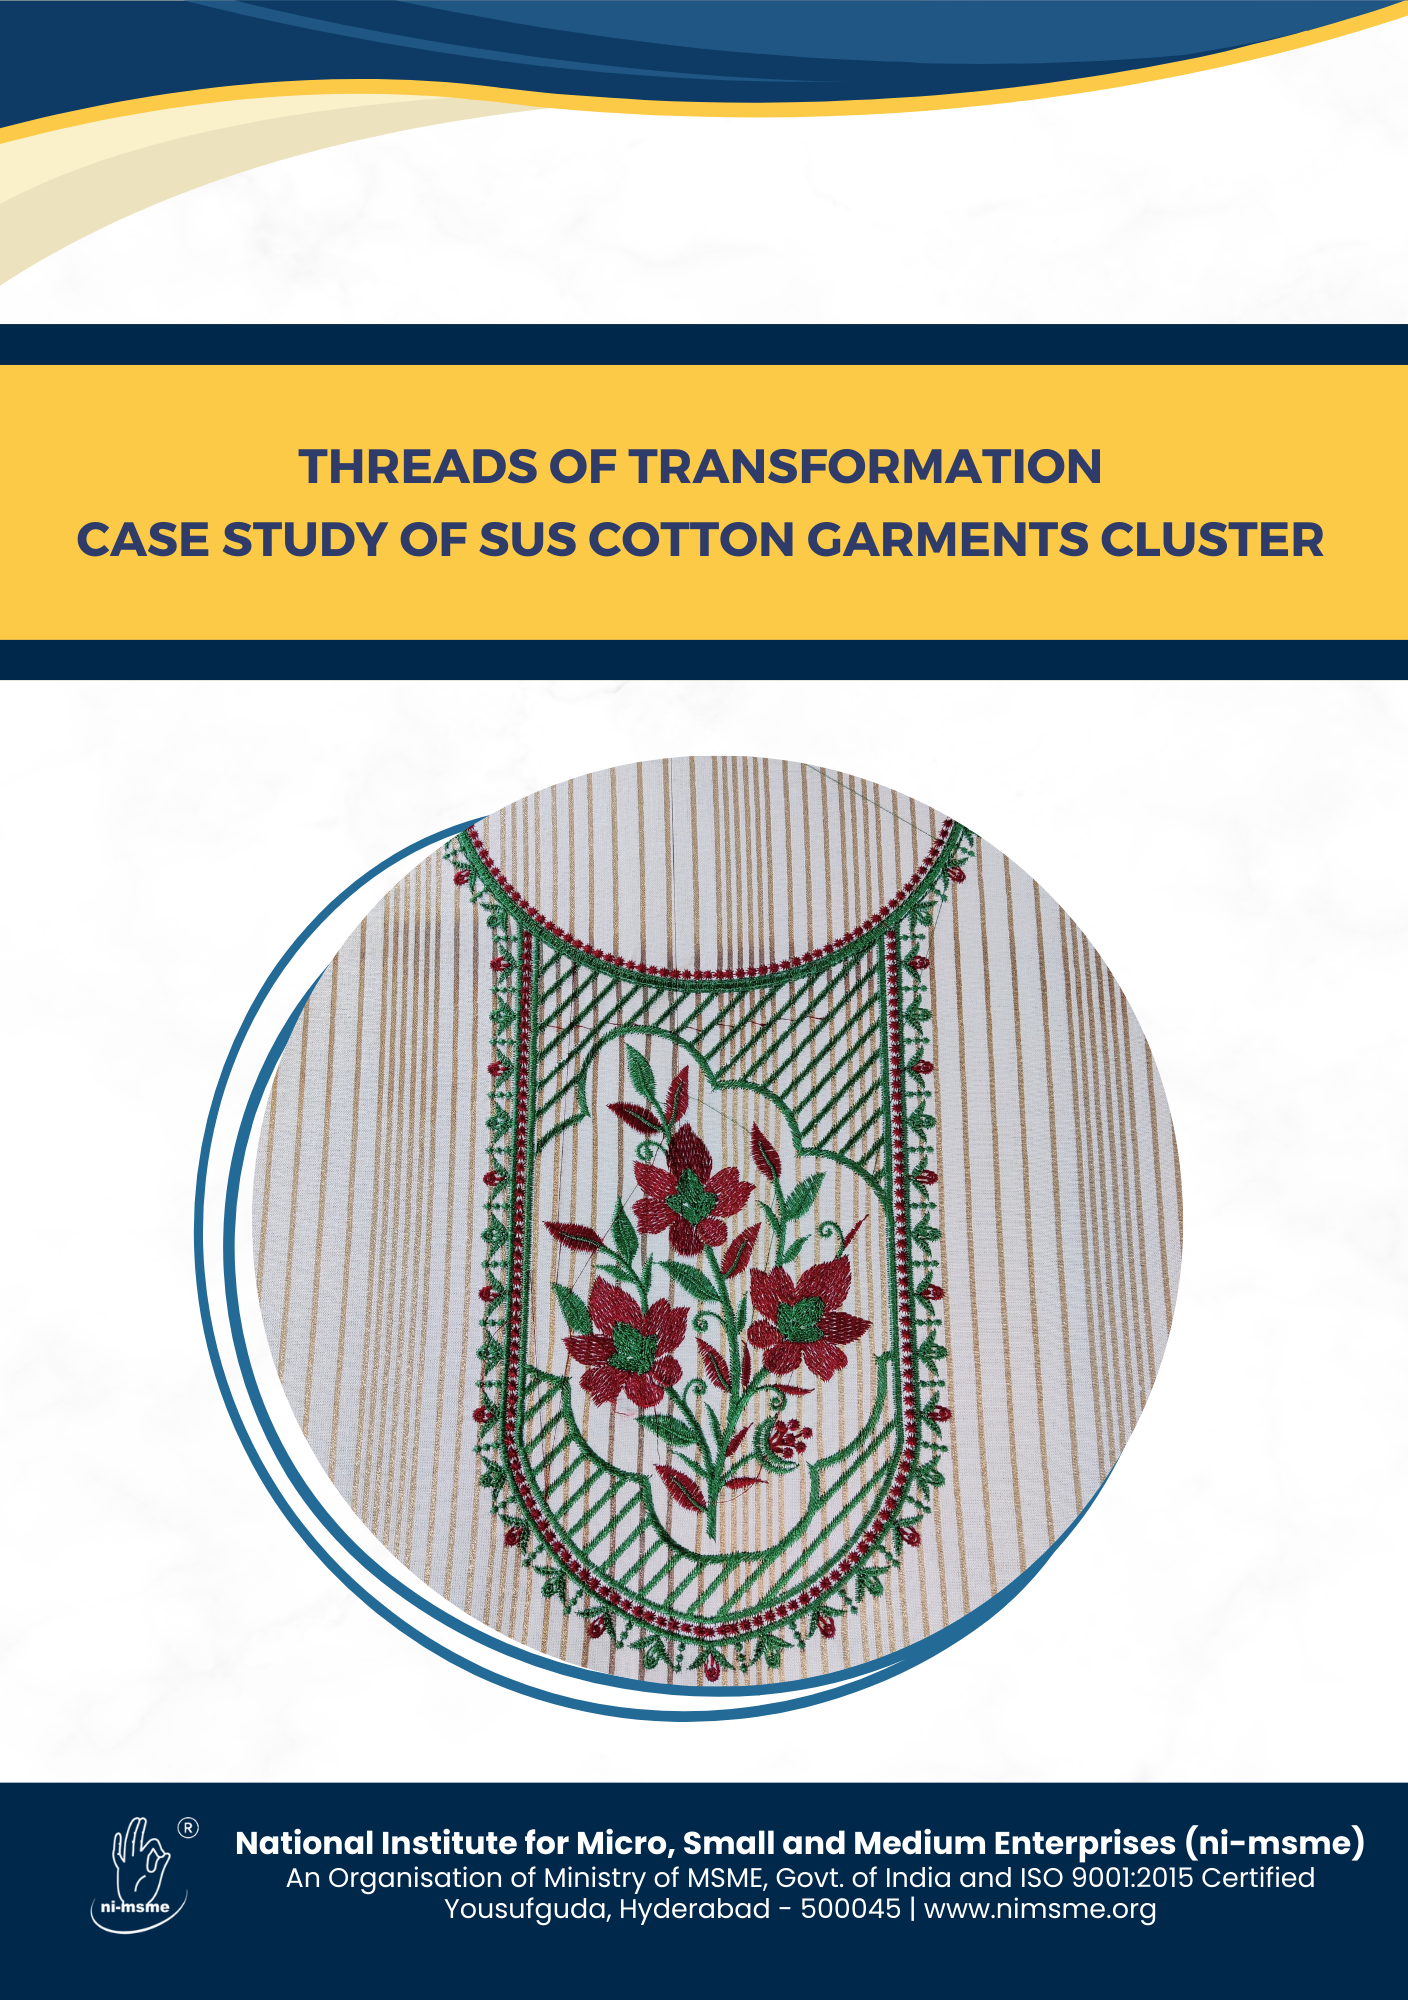 Threads of Transformation Case Study of SUS Cotton Garments Cluster